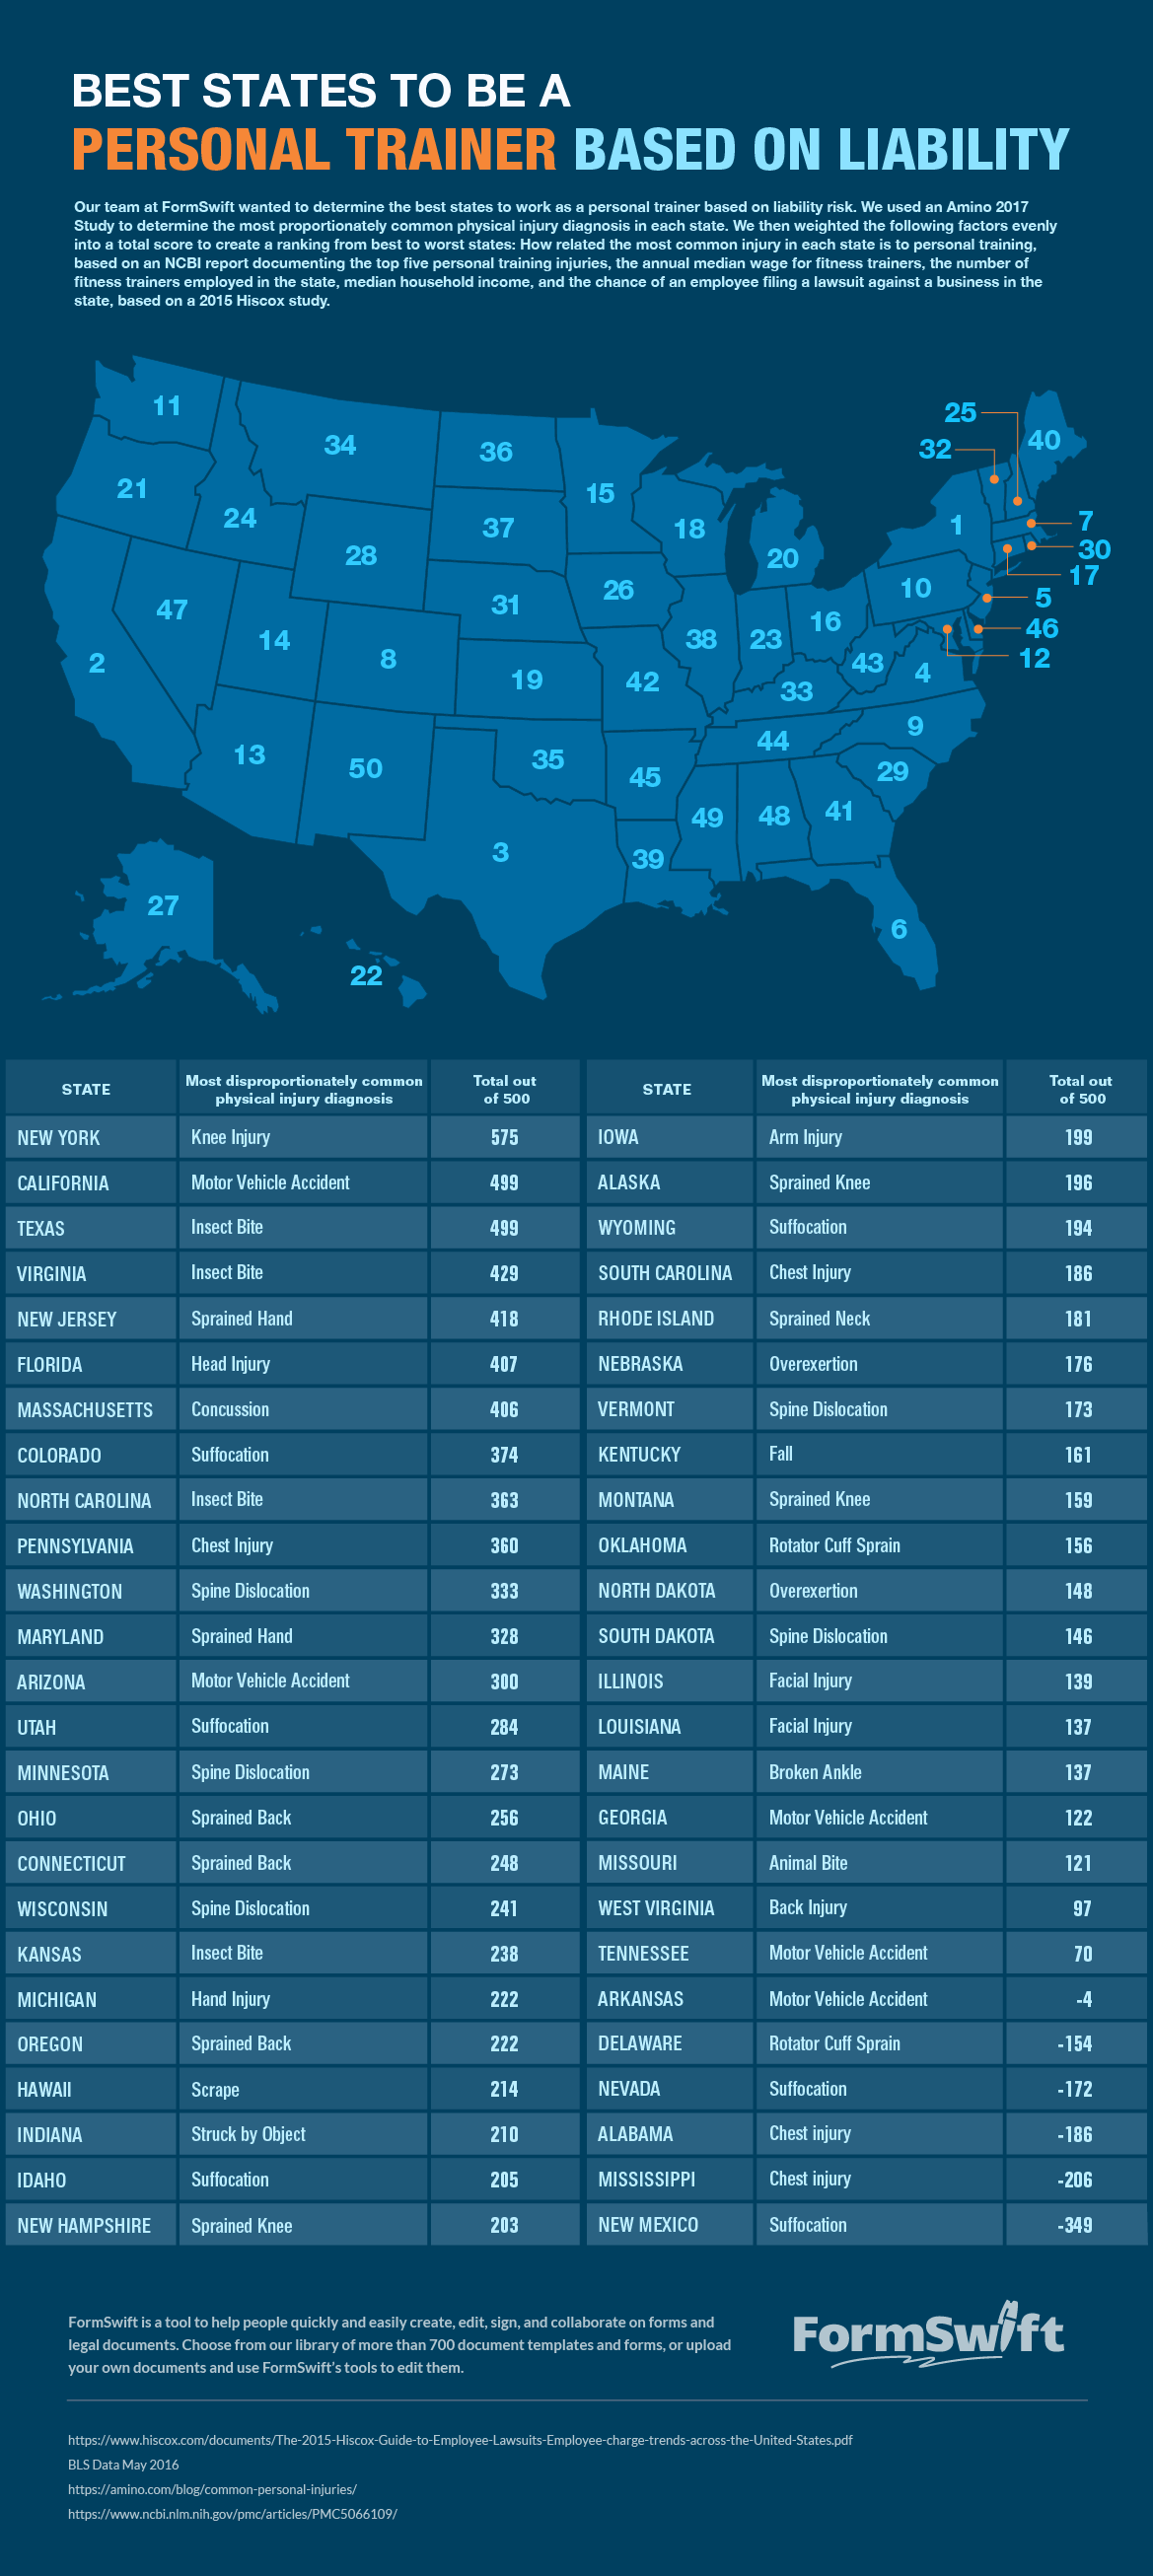 Study of the 2017 best states to be a personal trainer based on personal training liability risk.